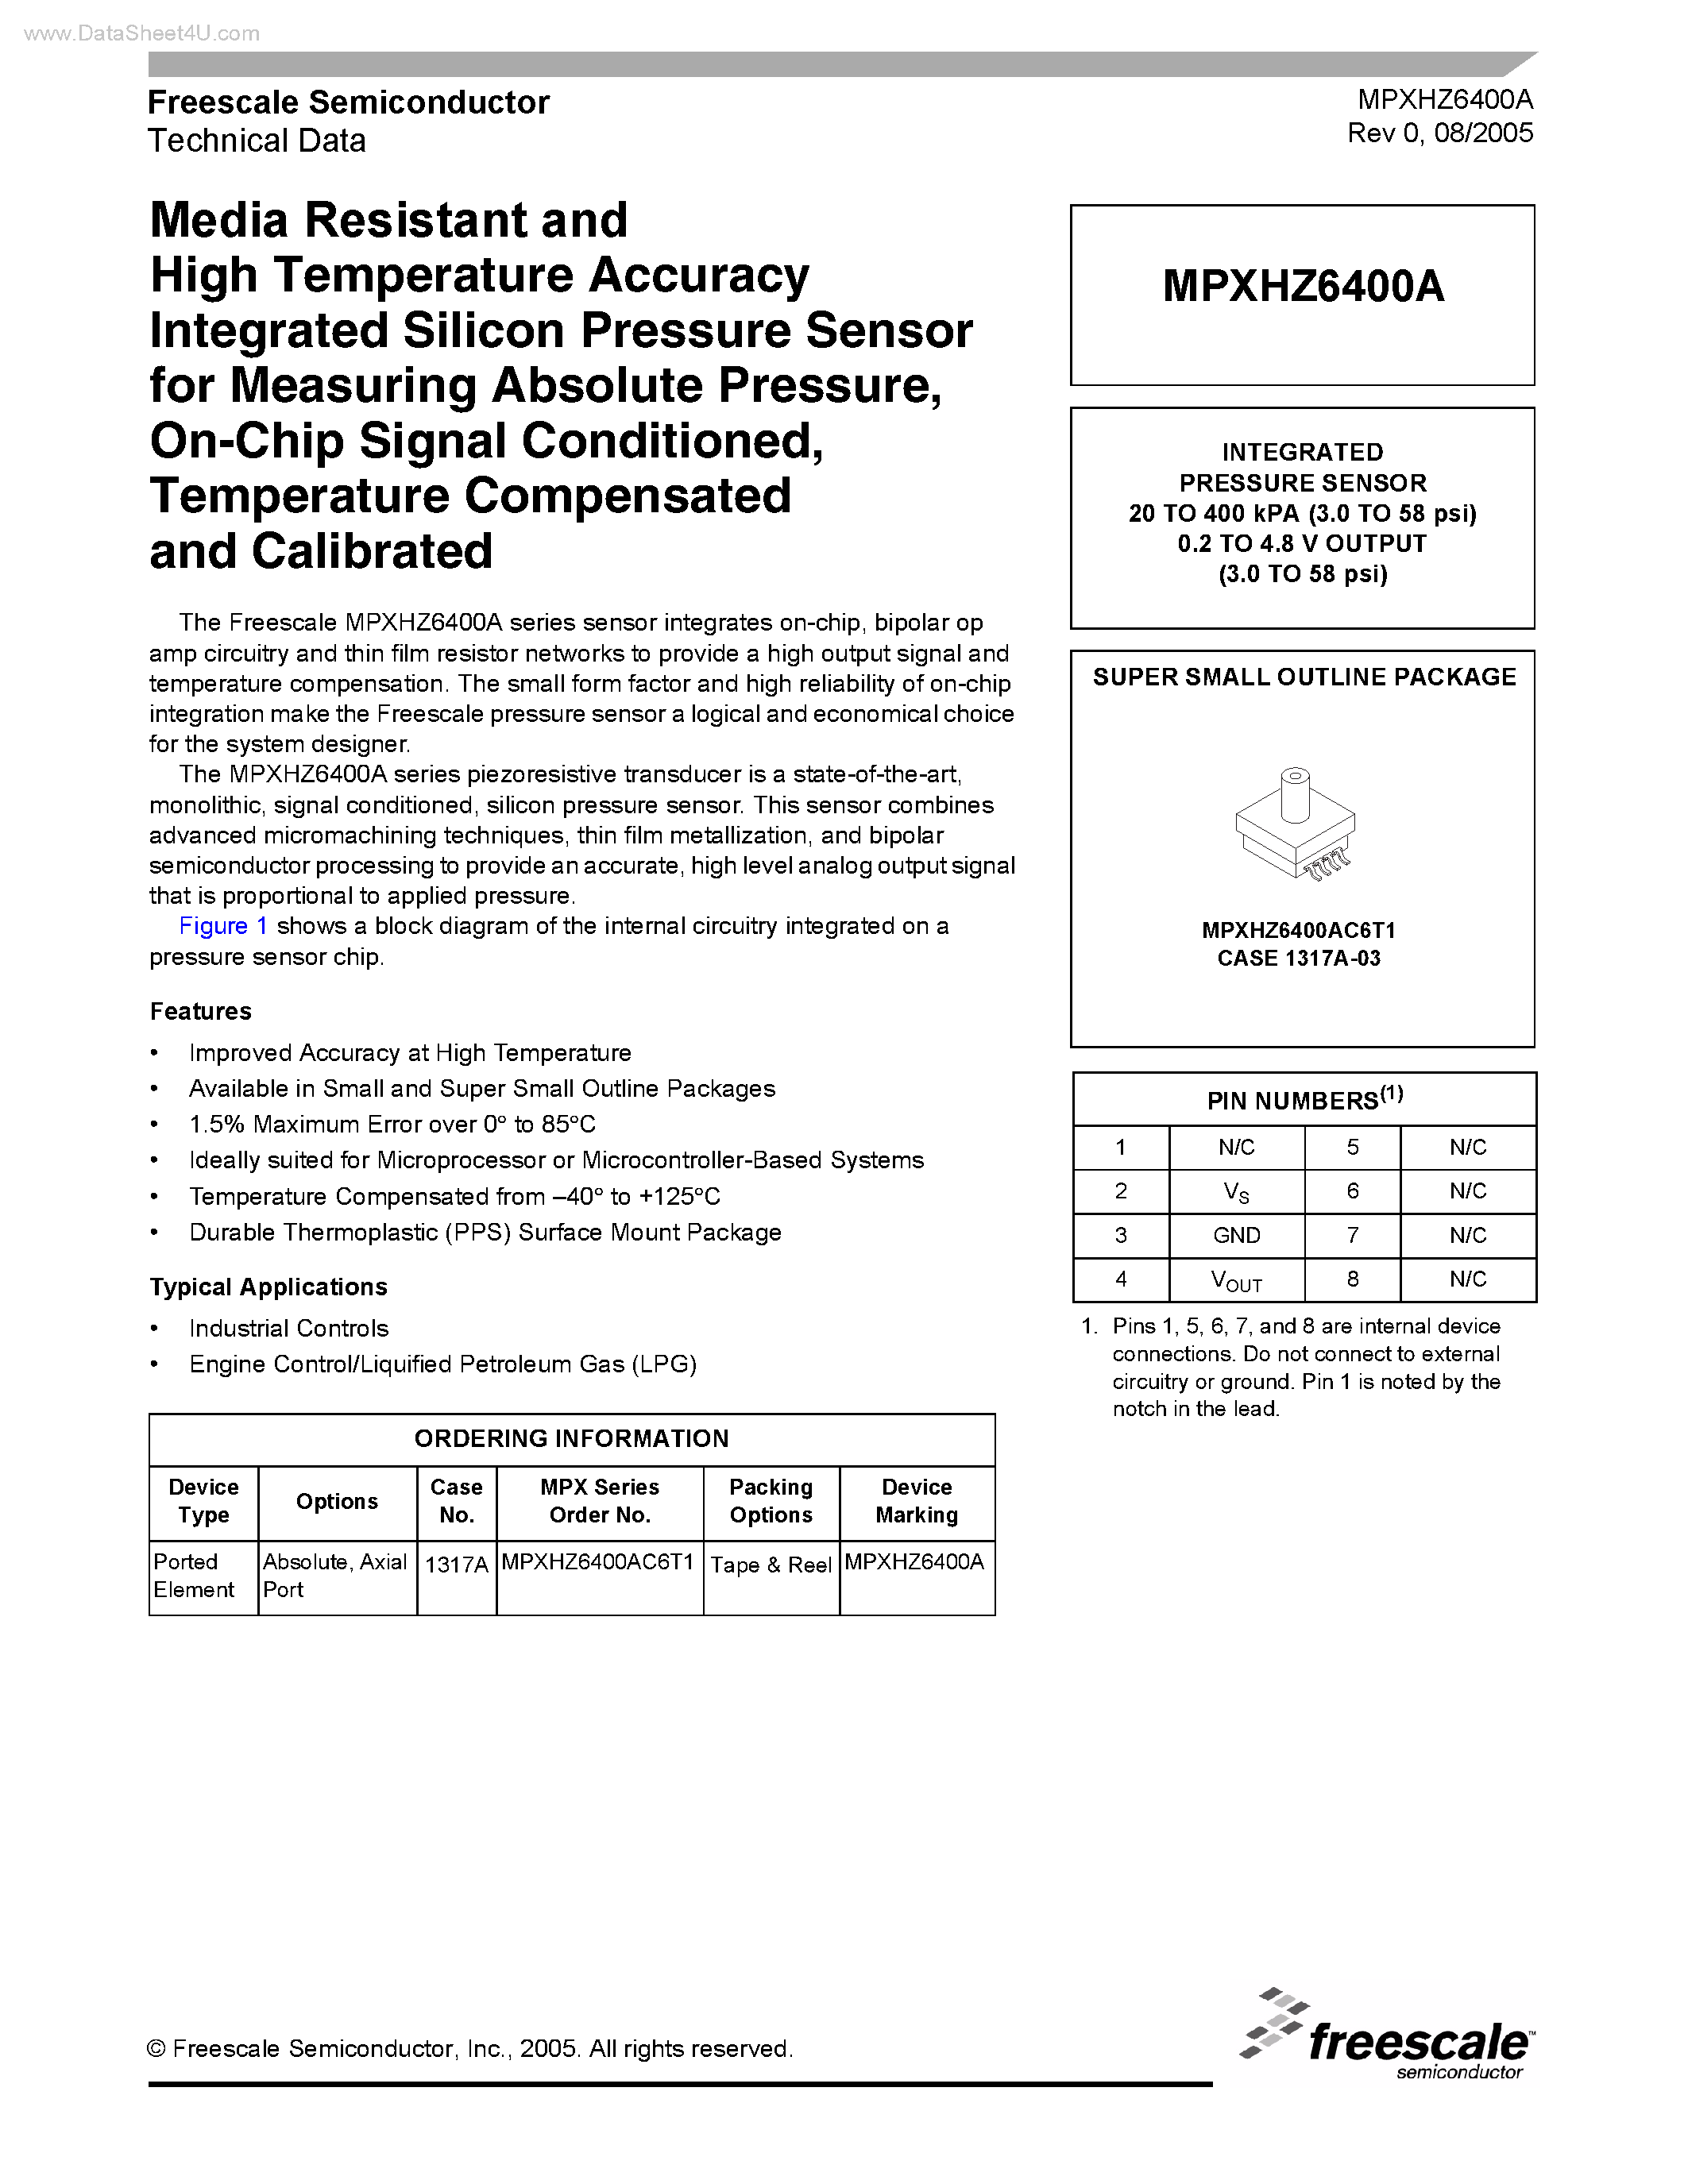 Datasheet MPXHZ6400A - Media Resistant and High Temperature Accuracy Intergrated Silicon Pressure Sensor page 1